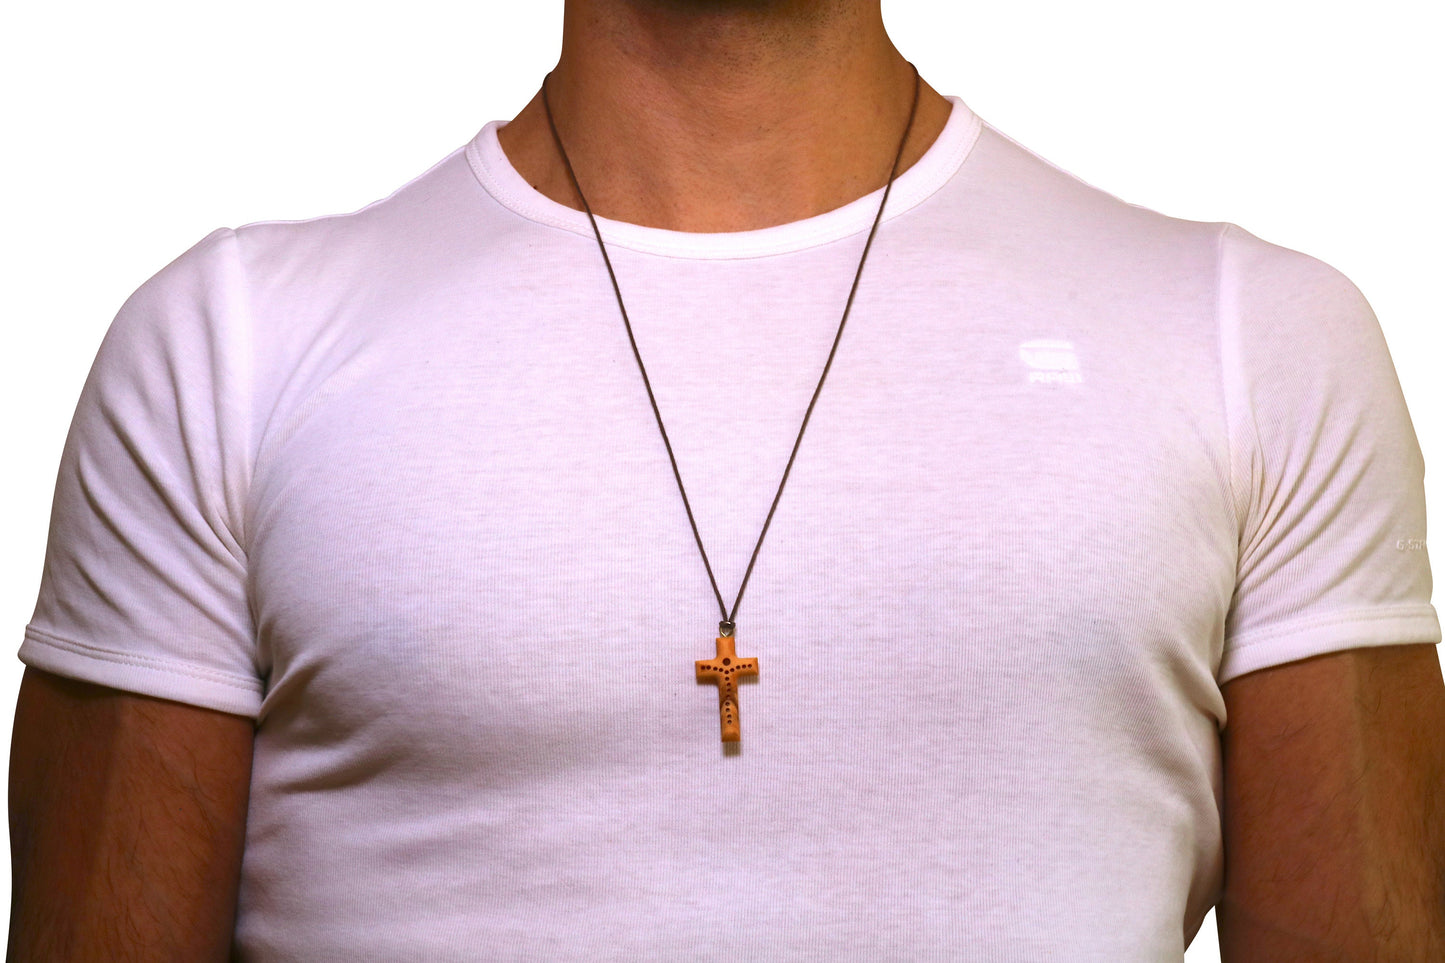 Unique Handmade Olive Wood Cross Necklace, Crafted In Nazareth, Engraved Pendant For Men, Women, Boys & Girls